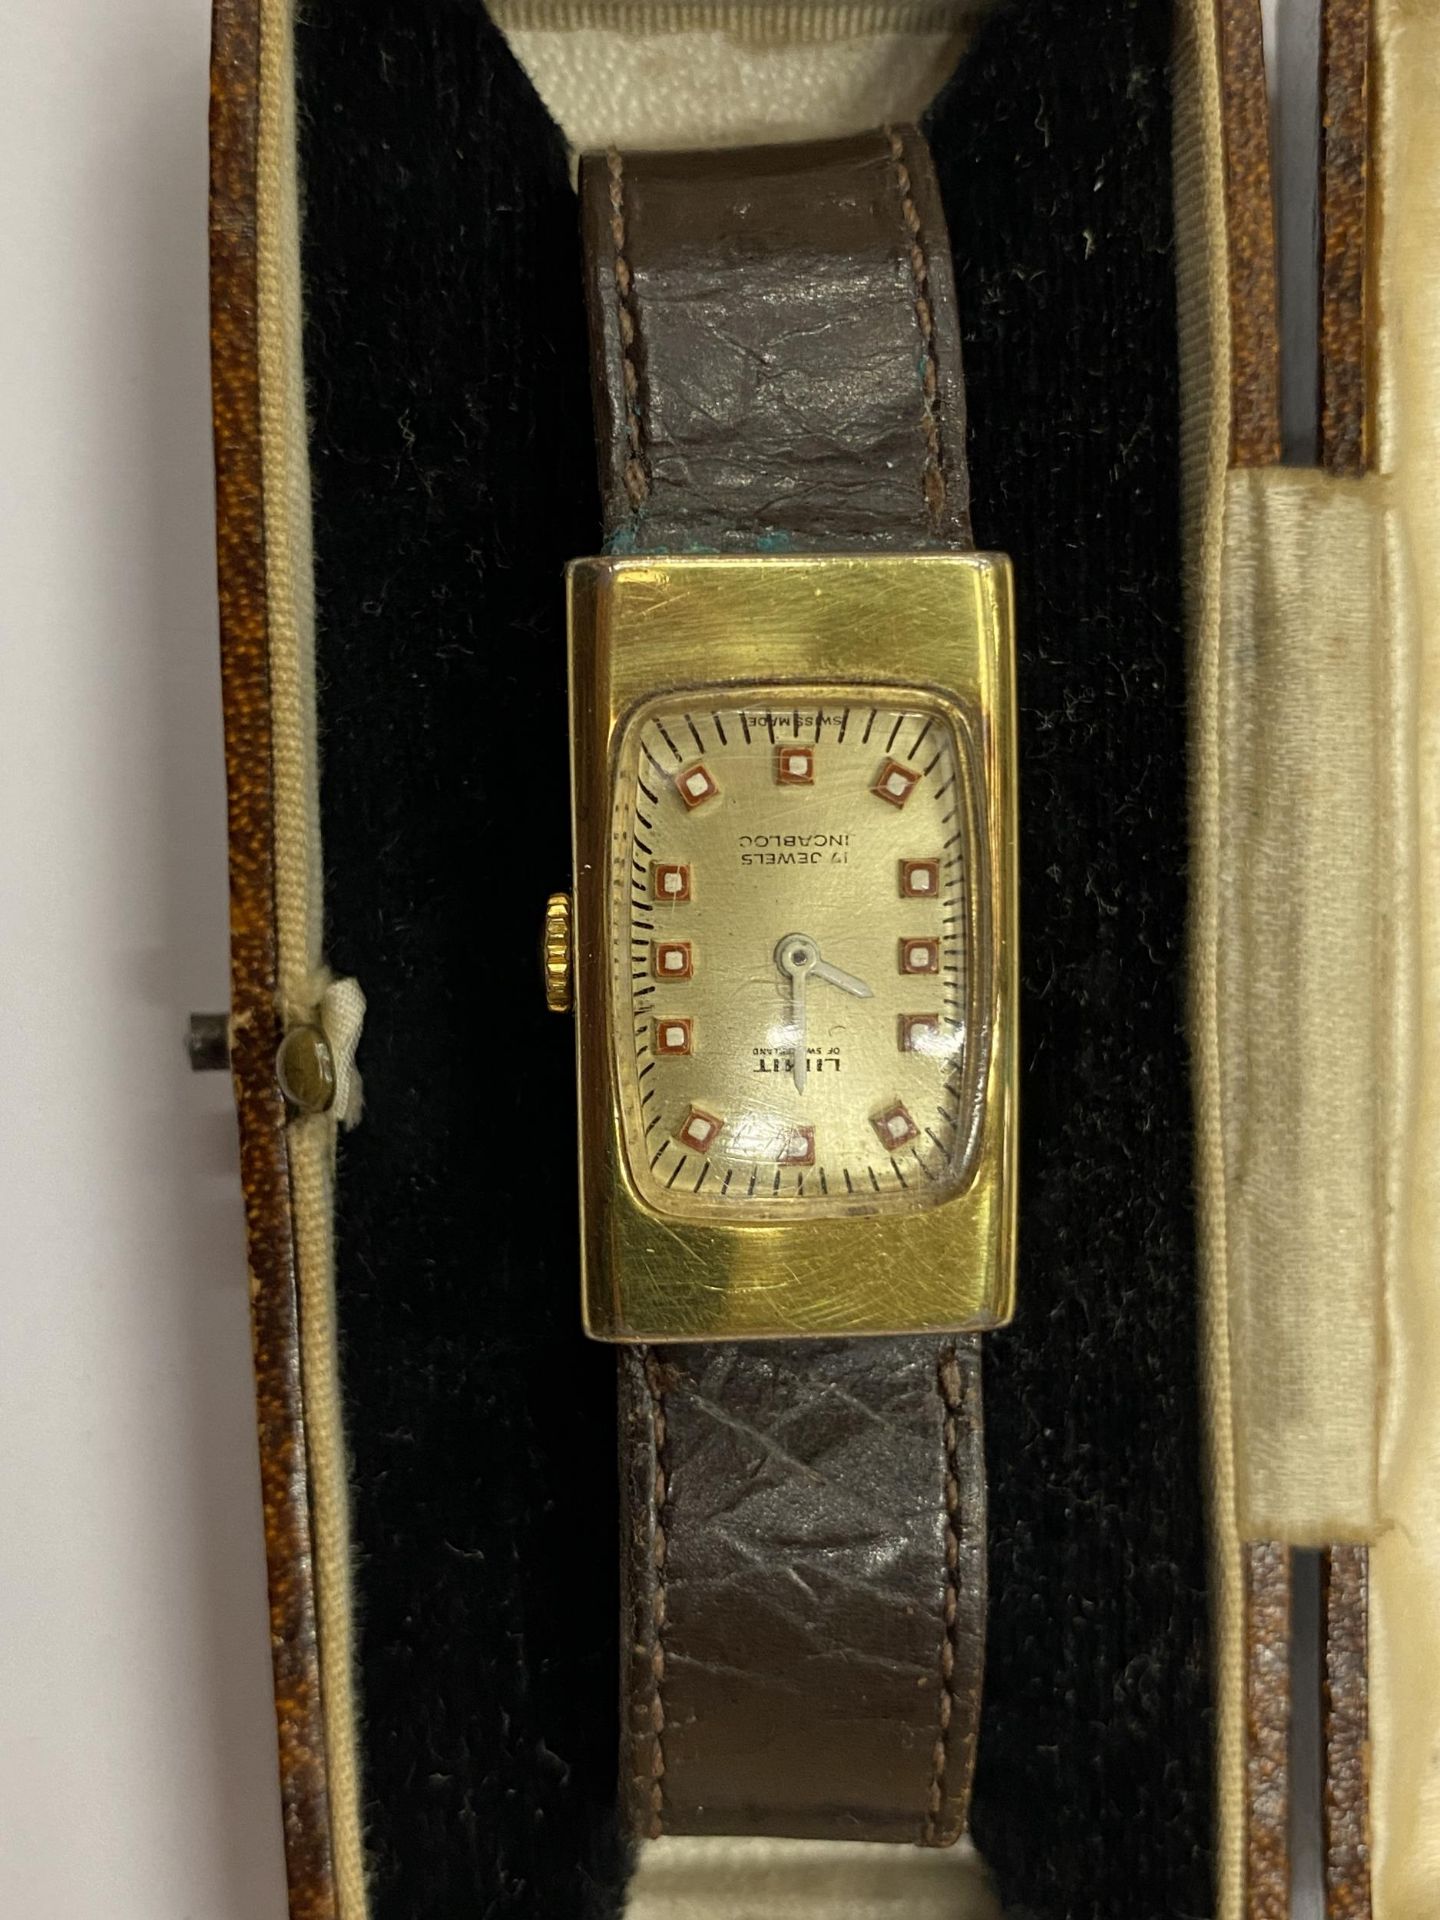 A VINTAGE BOXED LIMIT WATCH, WORKING WHEN CATALOGUED BUT NO WARRANTIES GIVEN - Image 2 of 2